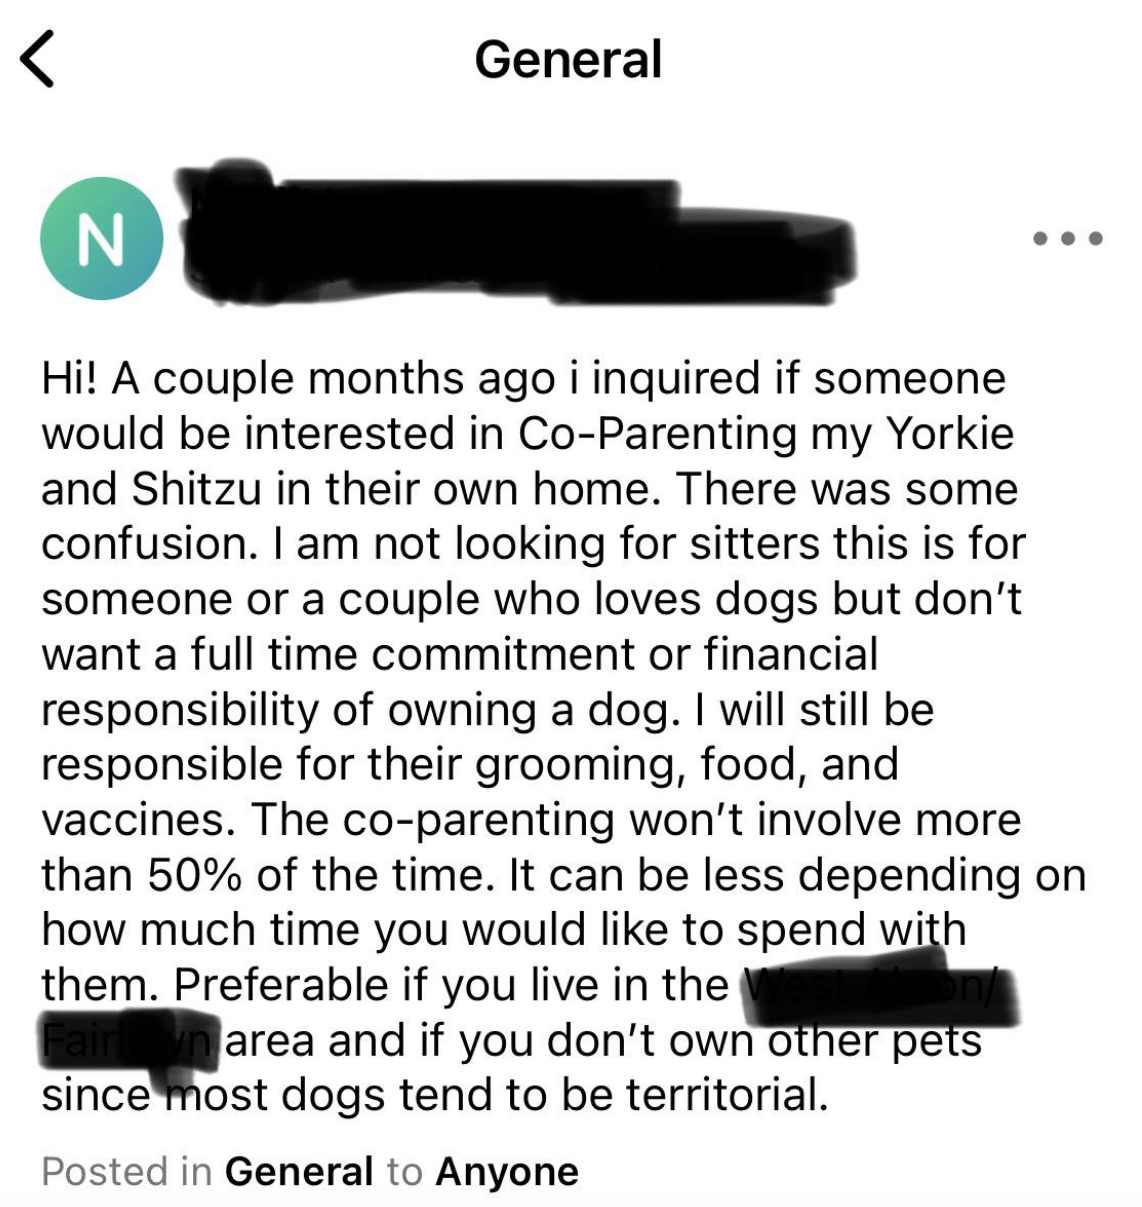 They&#x27;re looking for someone to co-parent their shih tzu and Yorkie in their home around 50% of the time, but they say they&#x27;ll still be responsible for grooming, food, and vaccines